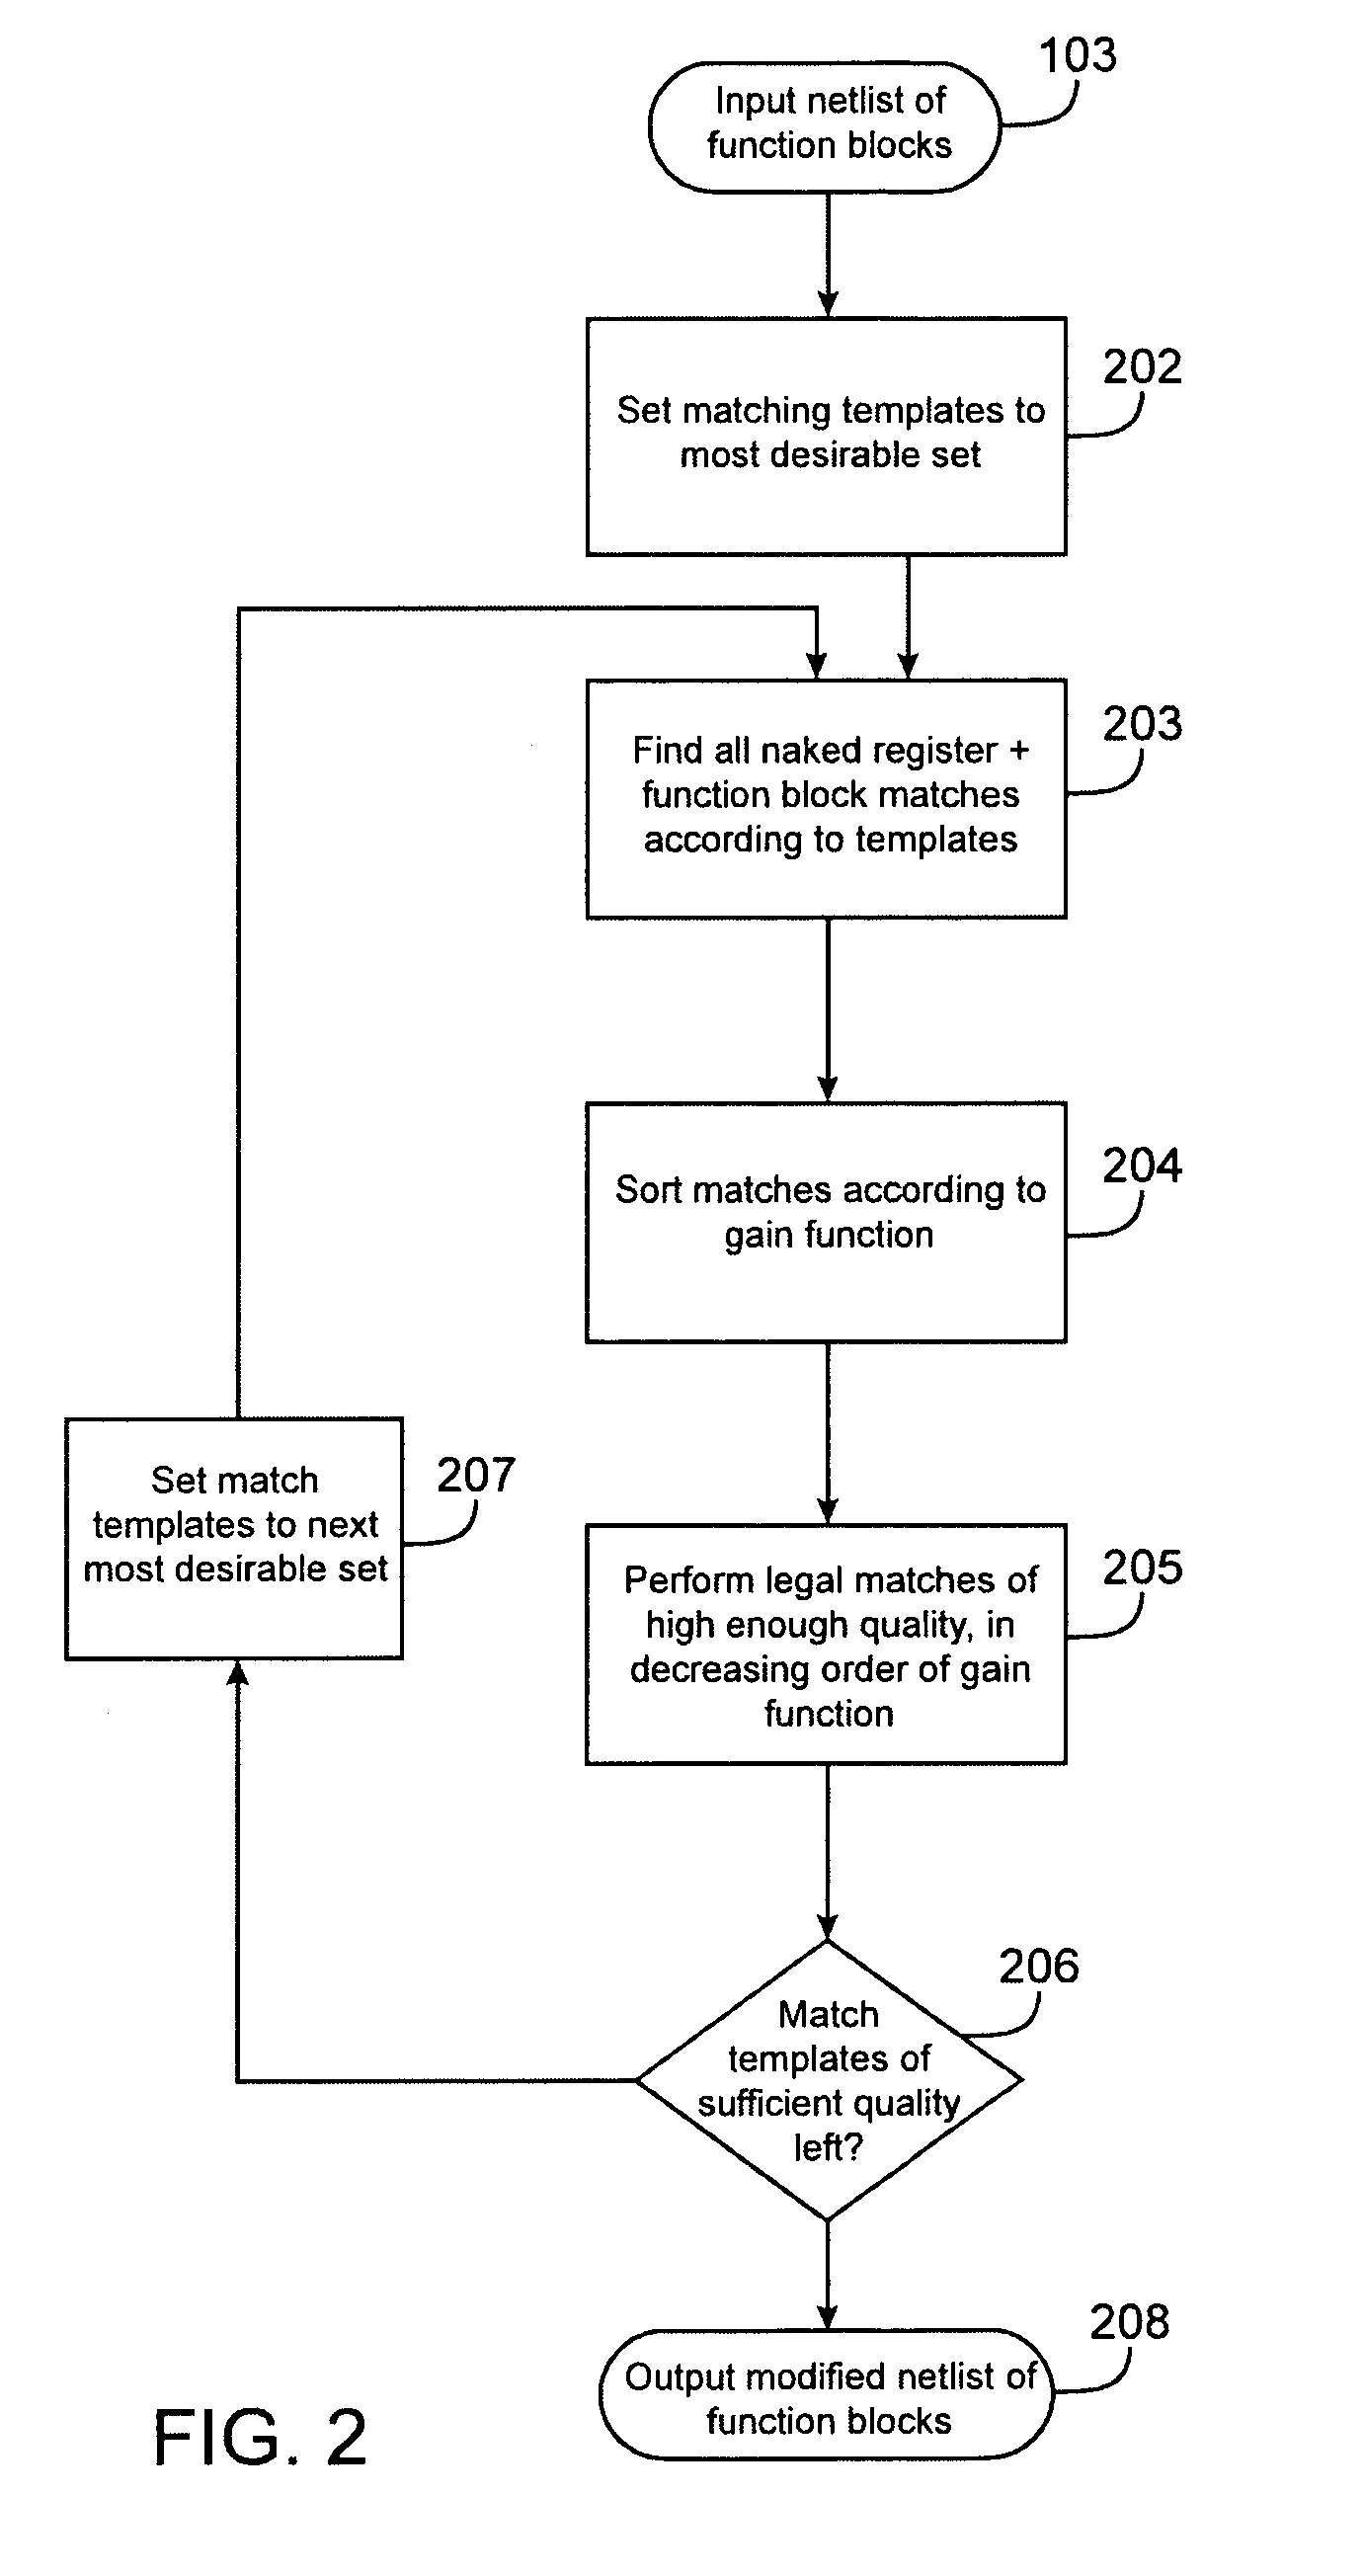 Techniques for identifying functional blocks in a design that match a template and combining the functional blocks into fewer programmable circuit elements